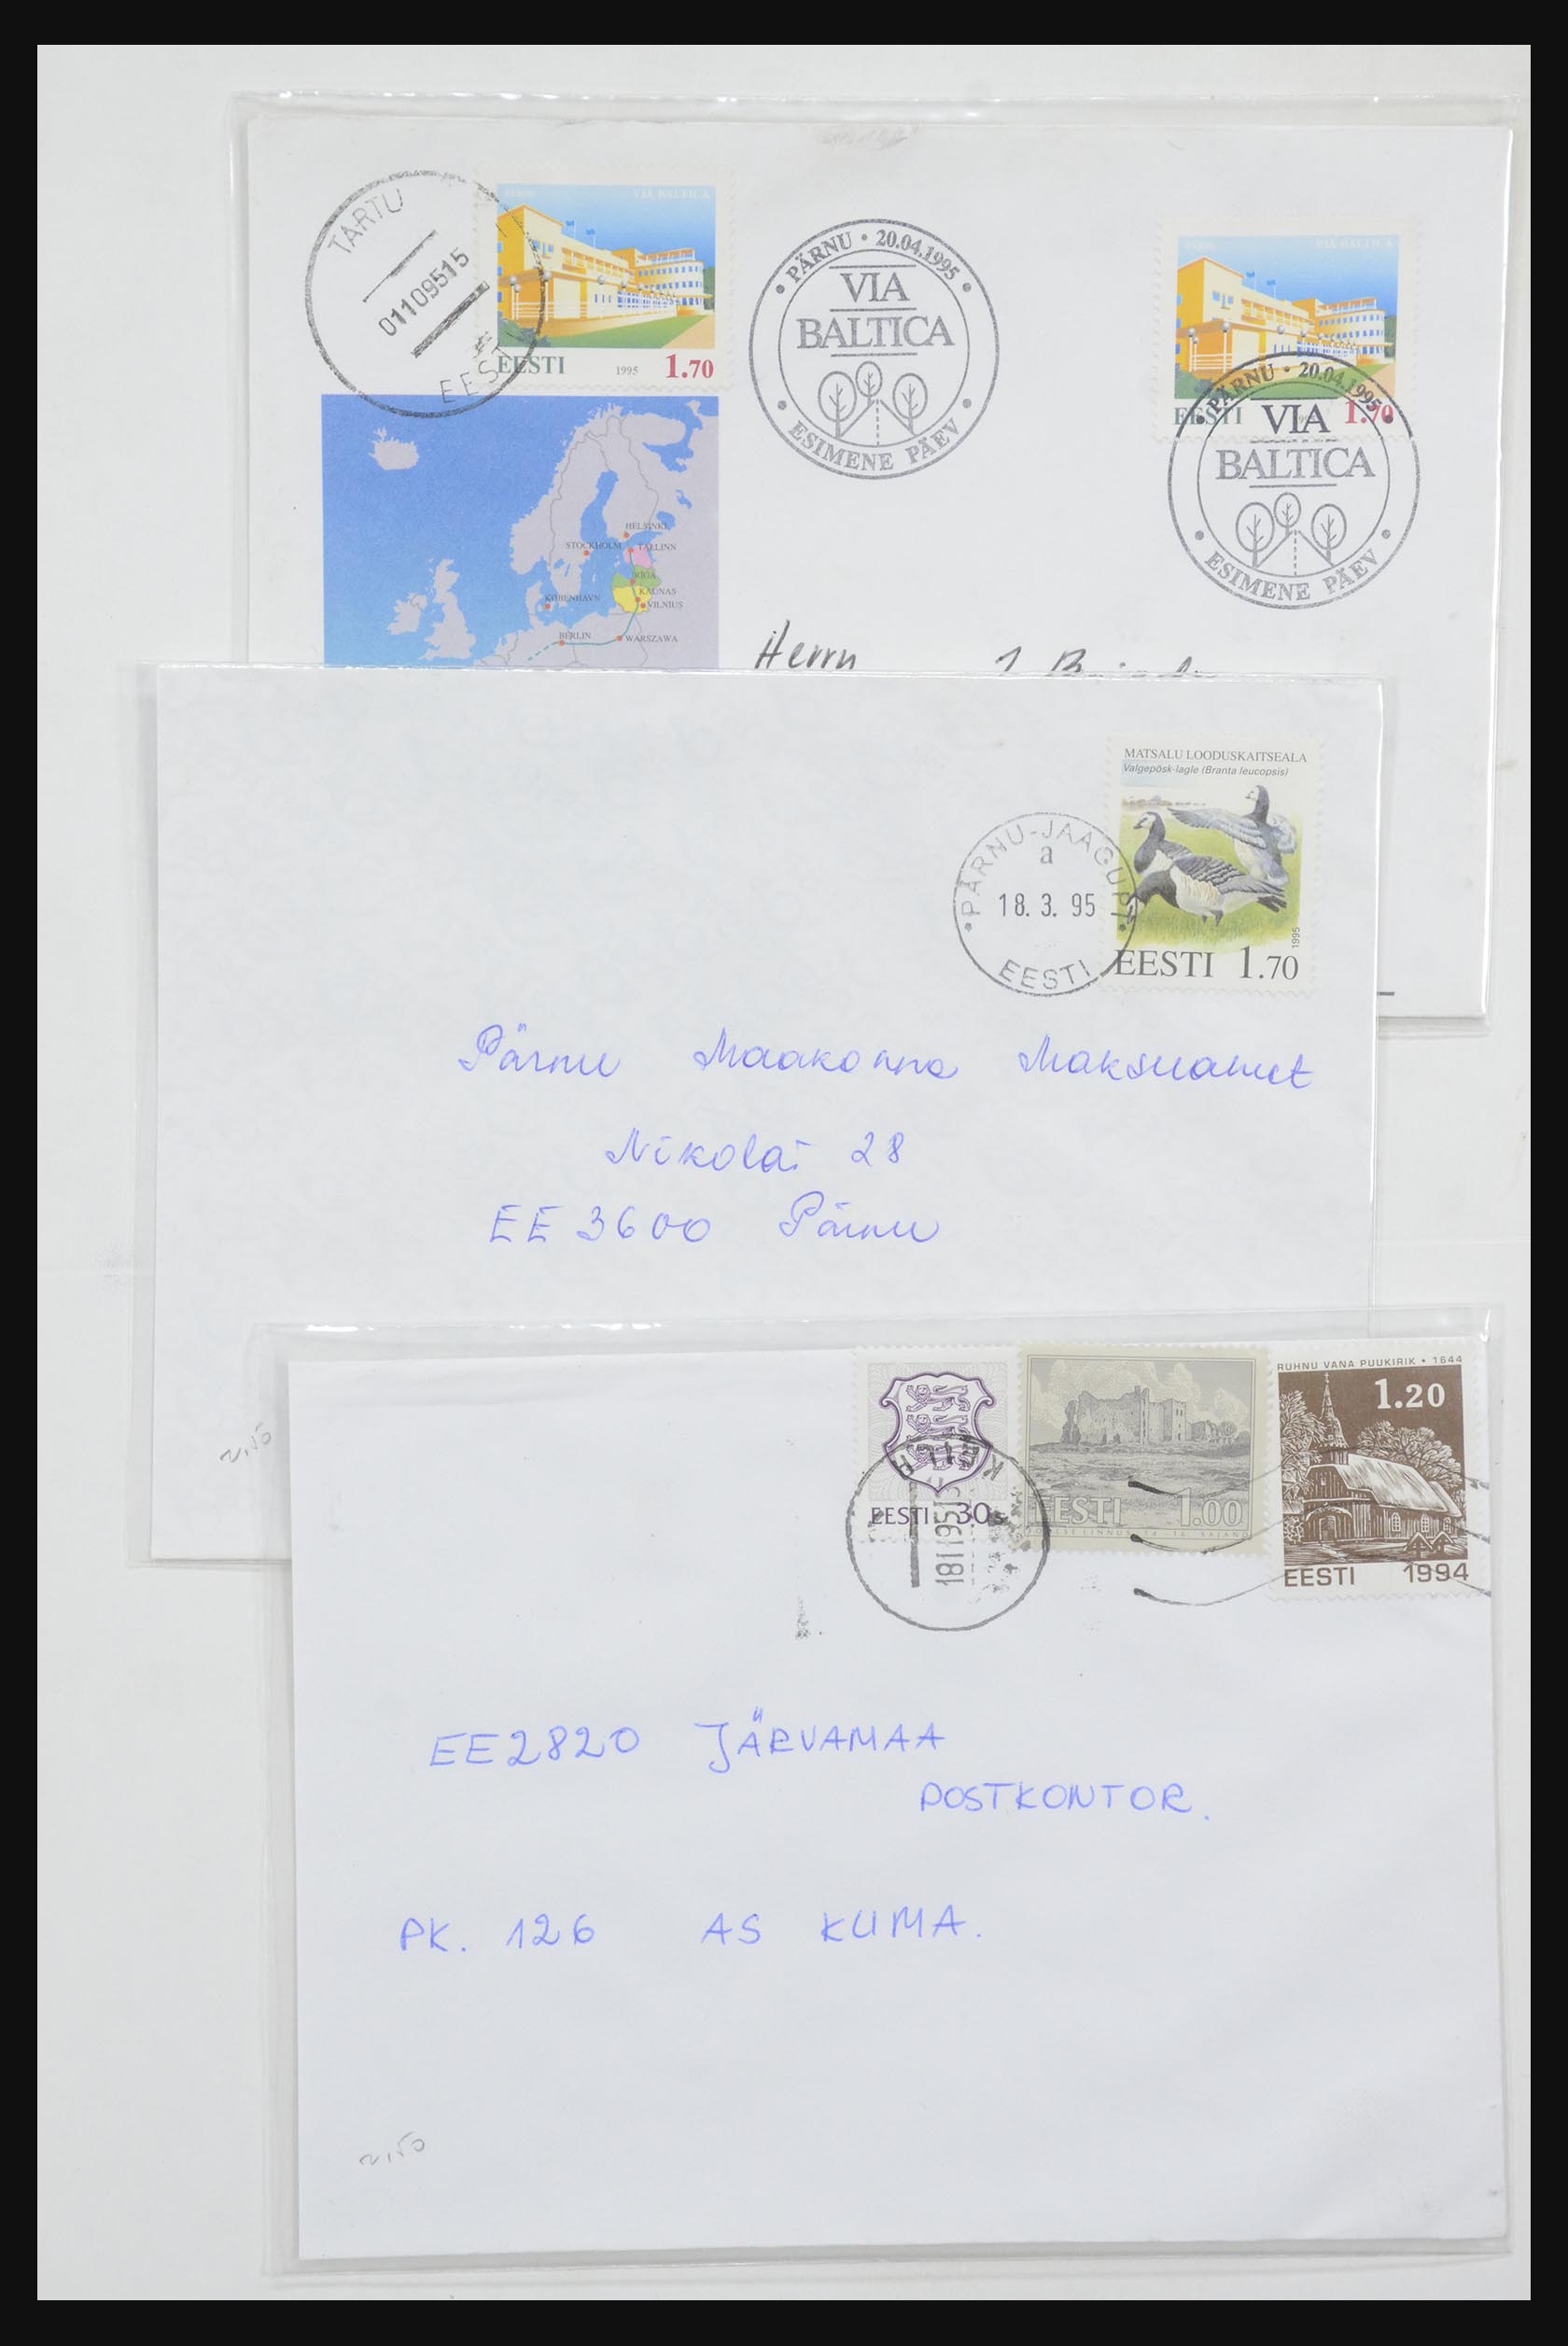 31928 1721 - 31928 Eastern Europe covers 1960's-1990's.